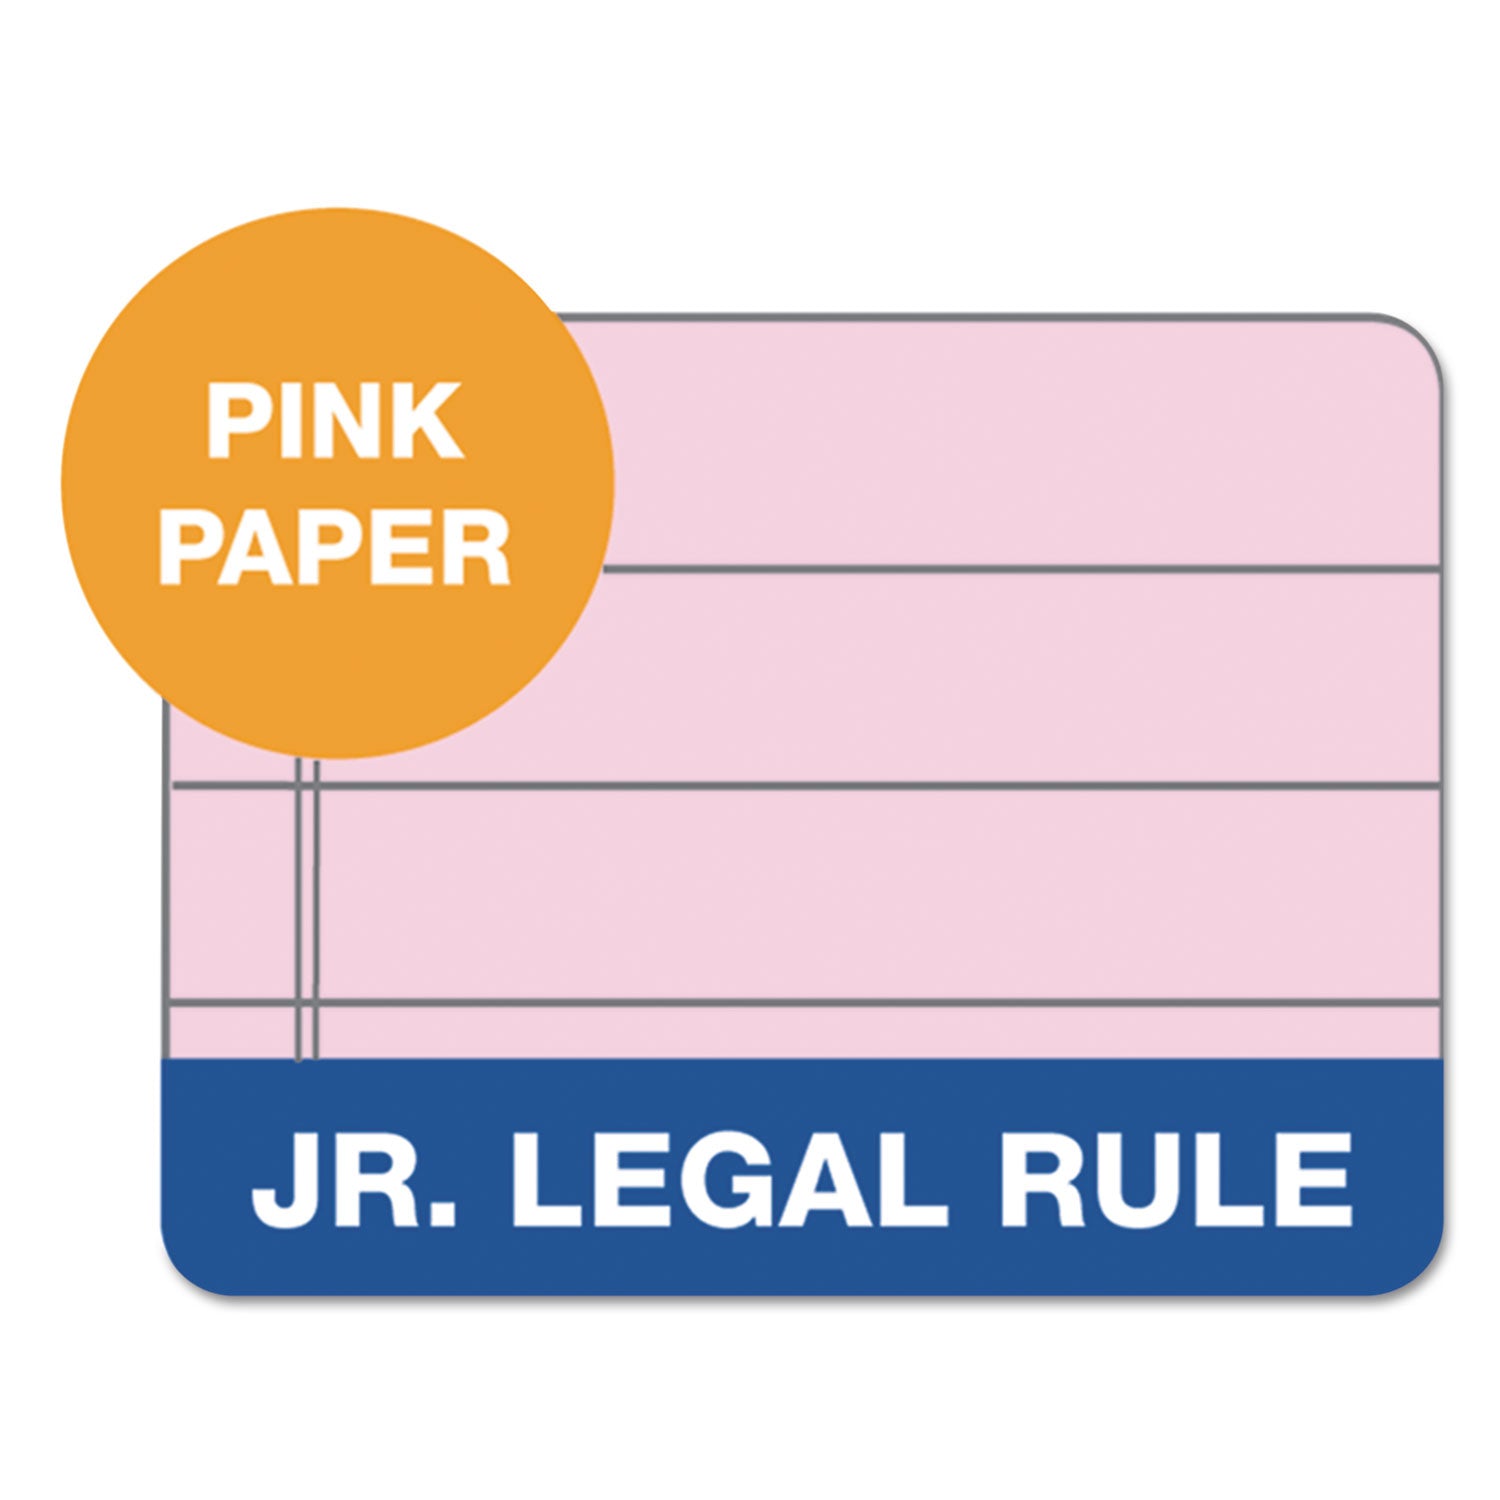 Prism + Colored Writing Pads, Narrow Rule, 50 Pastel Pink 5 x 8 Sheets, 12/Pack - 